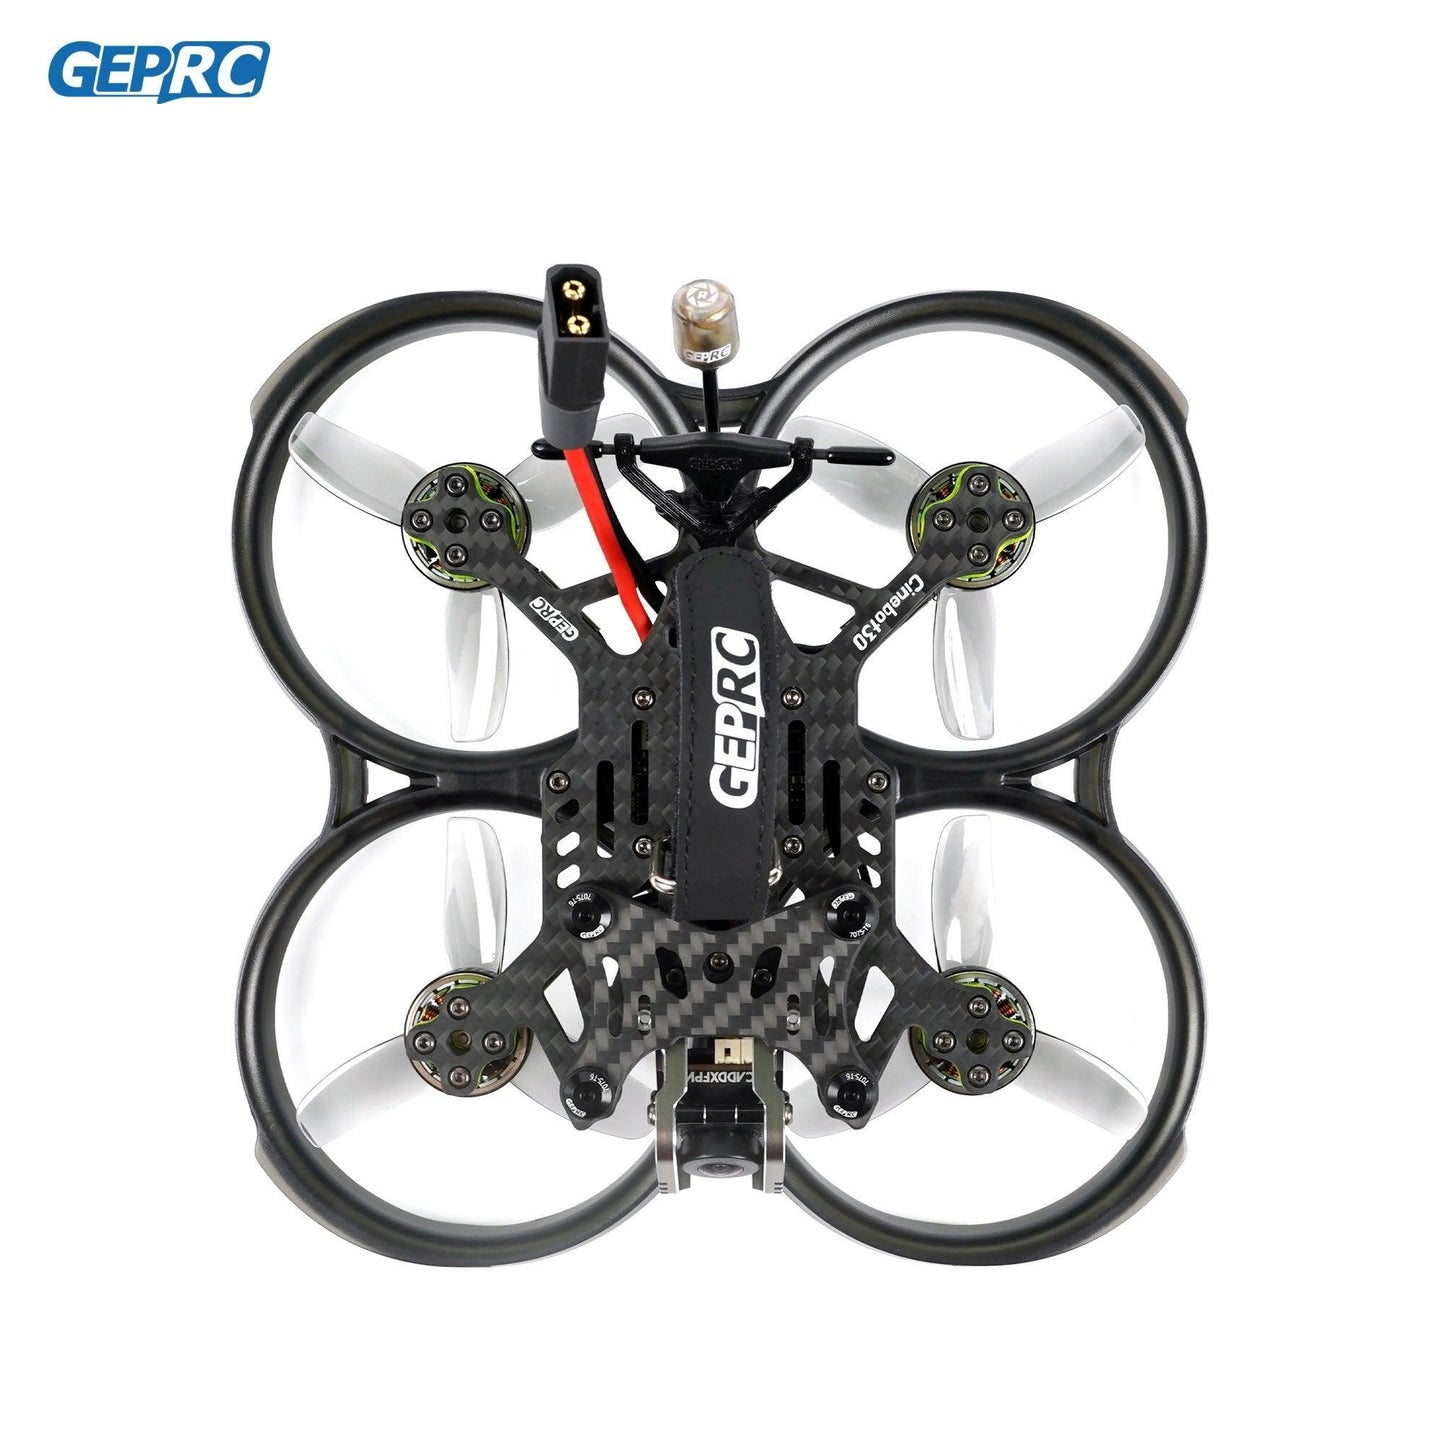 GEPRC Cinebot30 FPV Drone - Analog 4S 6S Ultralight FPV Racing Drone TBS Nano RX / Caddx Ratel 2 GEP-F722-45A AlO V2 for RC FPV Quadcopter - RCDrone